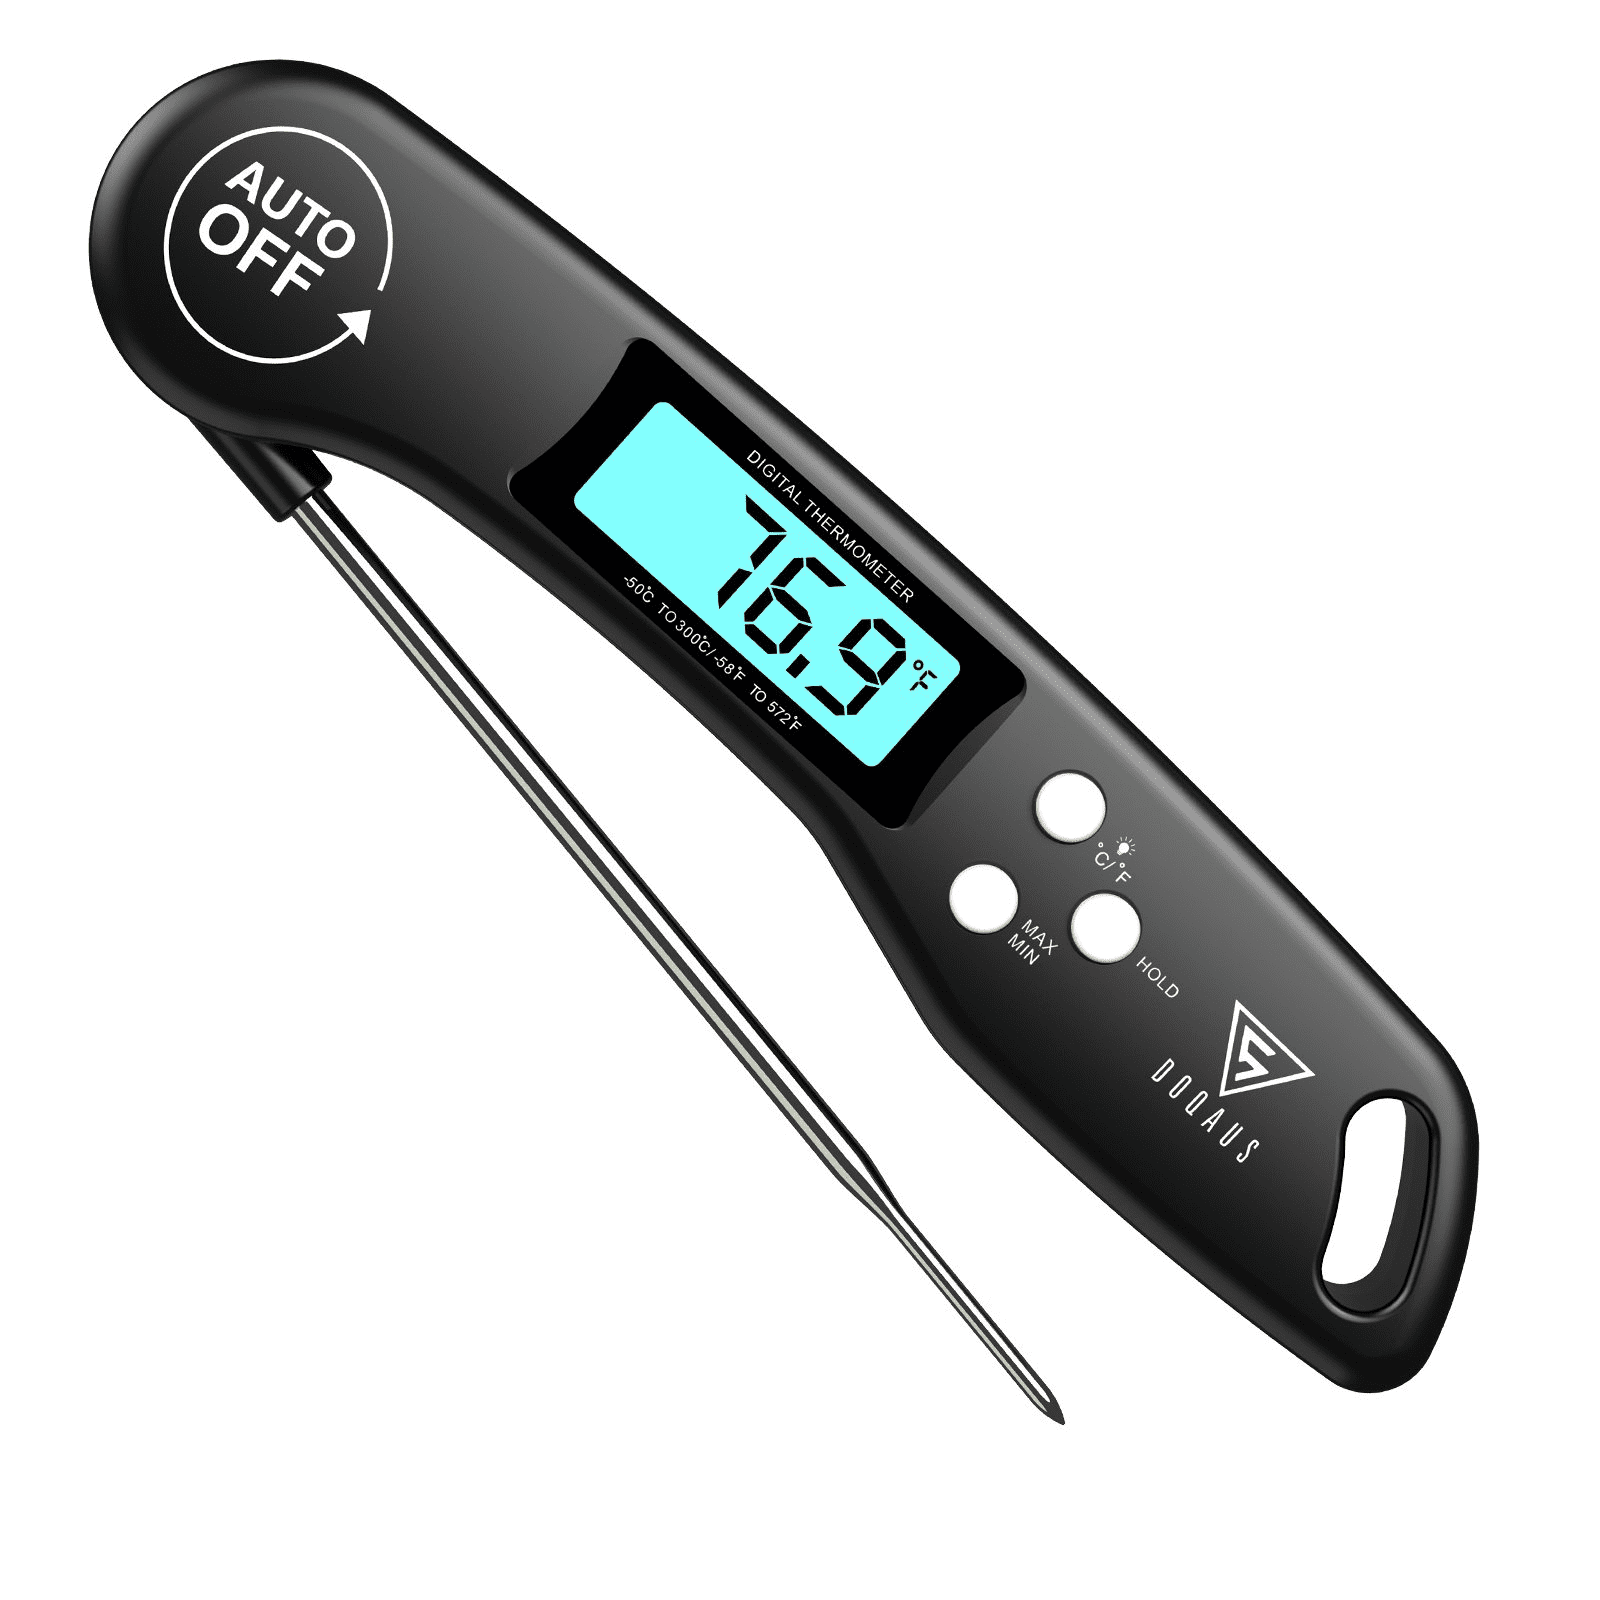 NIXIUKOL Digital Meat Thermometer 2-in-1 Grillthermometer Instant Read with Temperature Alarm, Large LCD Screen, Magnet, Food Thermometer Best for BBQ